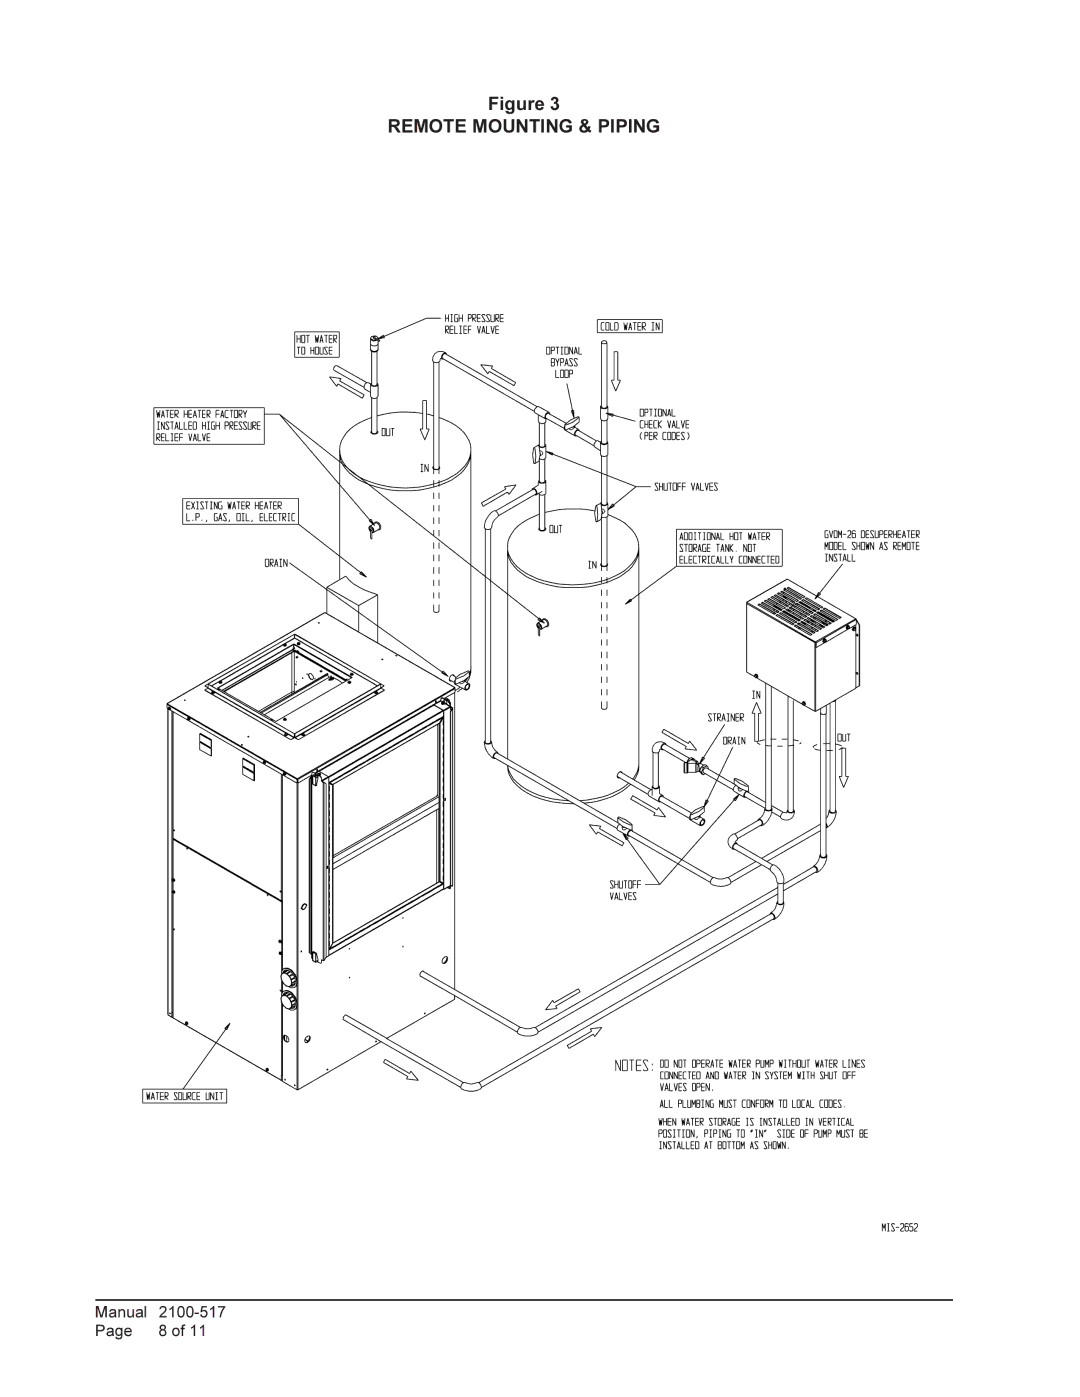 Bard GVDM-26 installation instructions Remote Mounting & Piping 